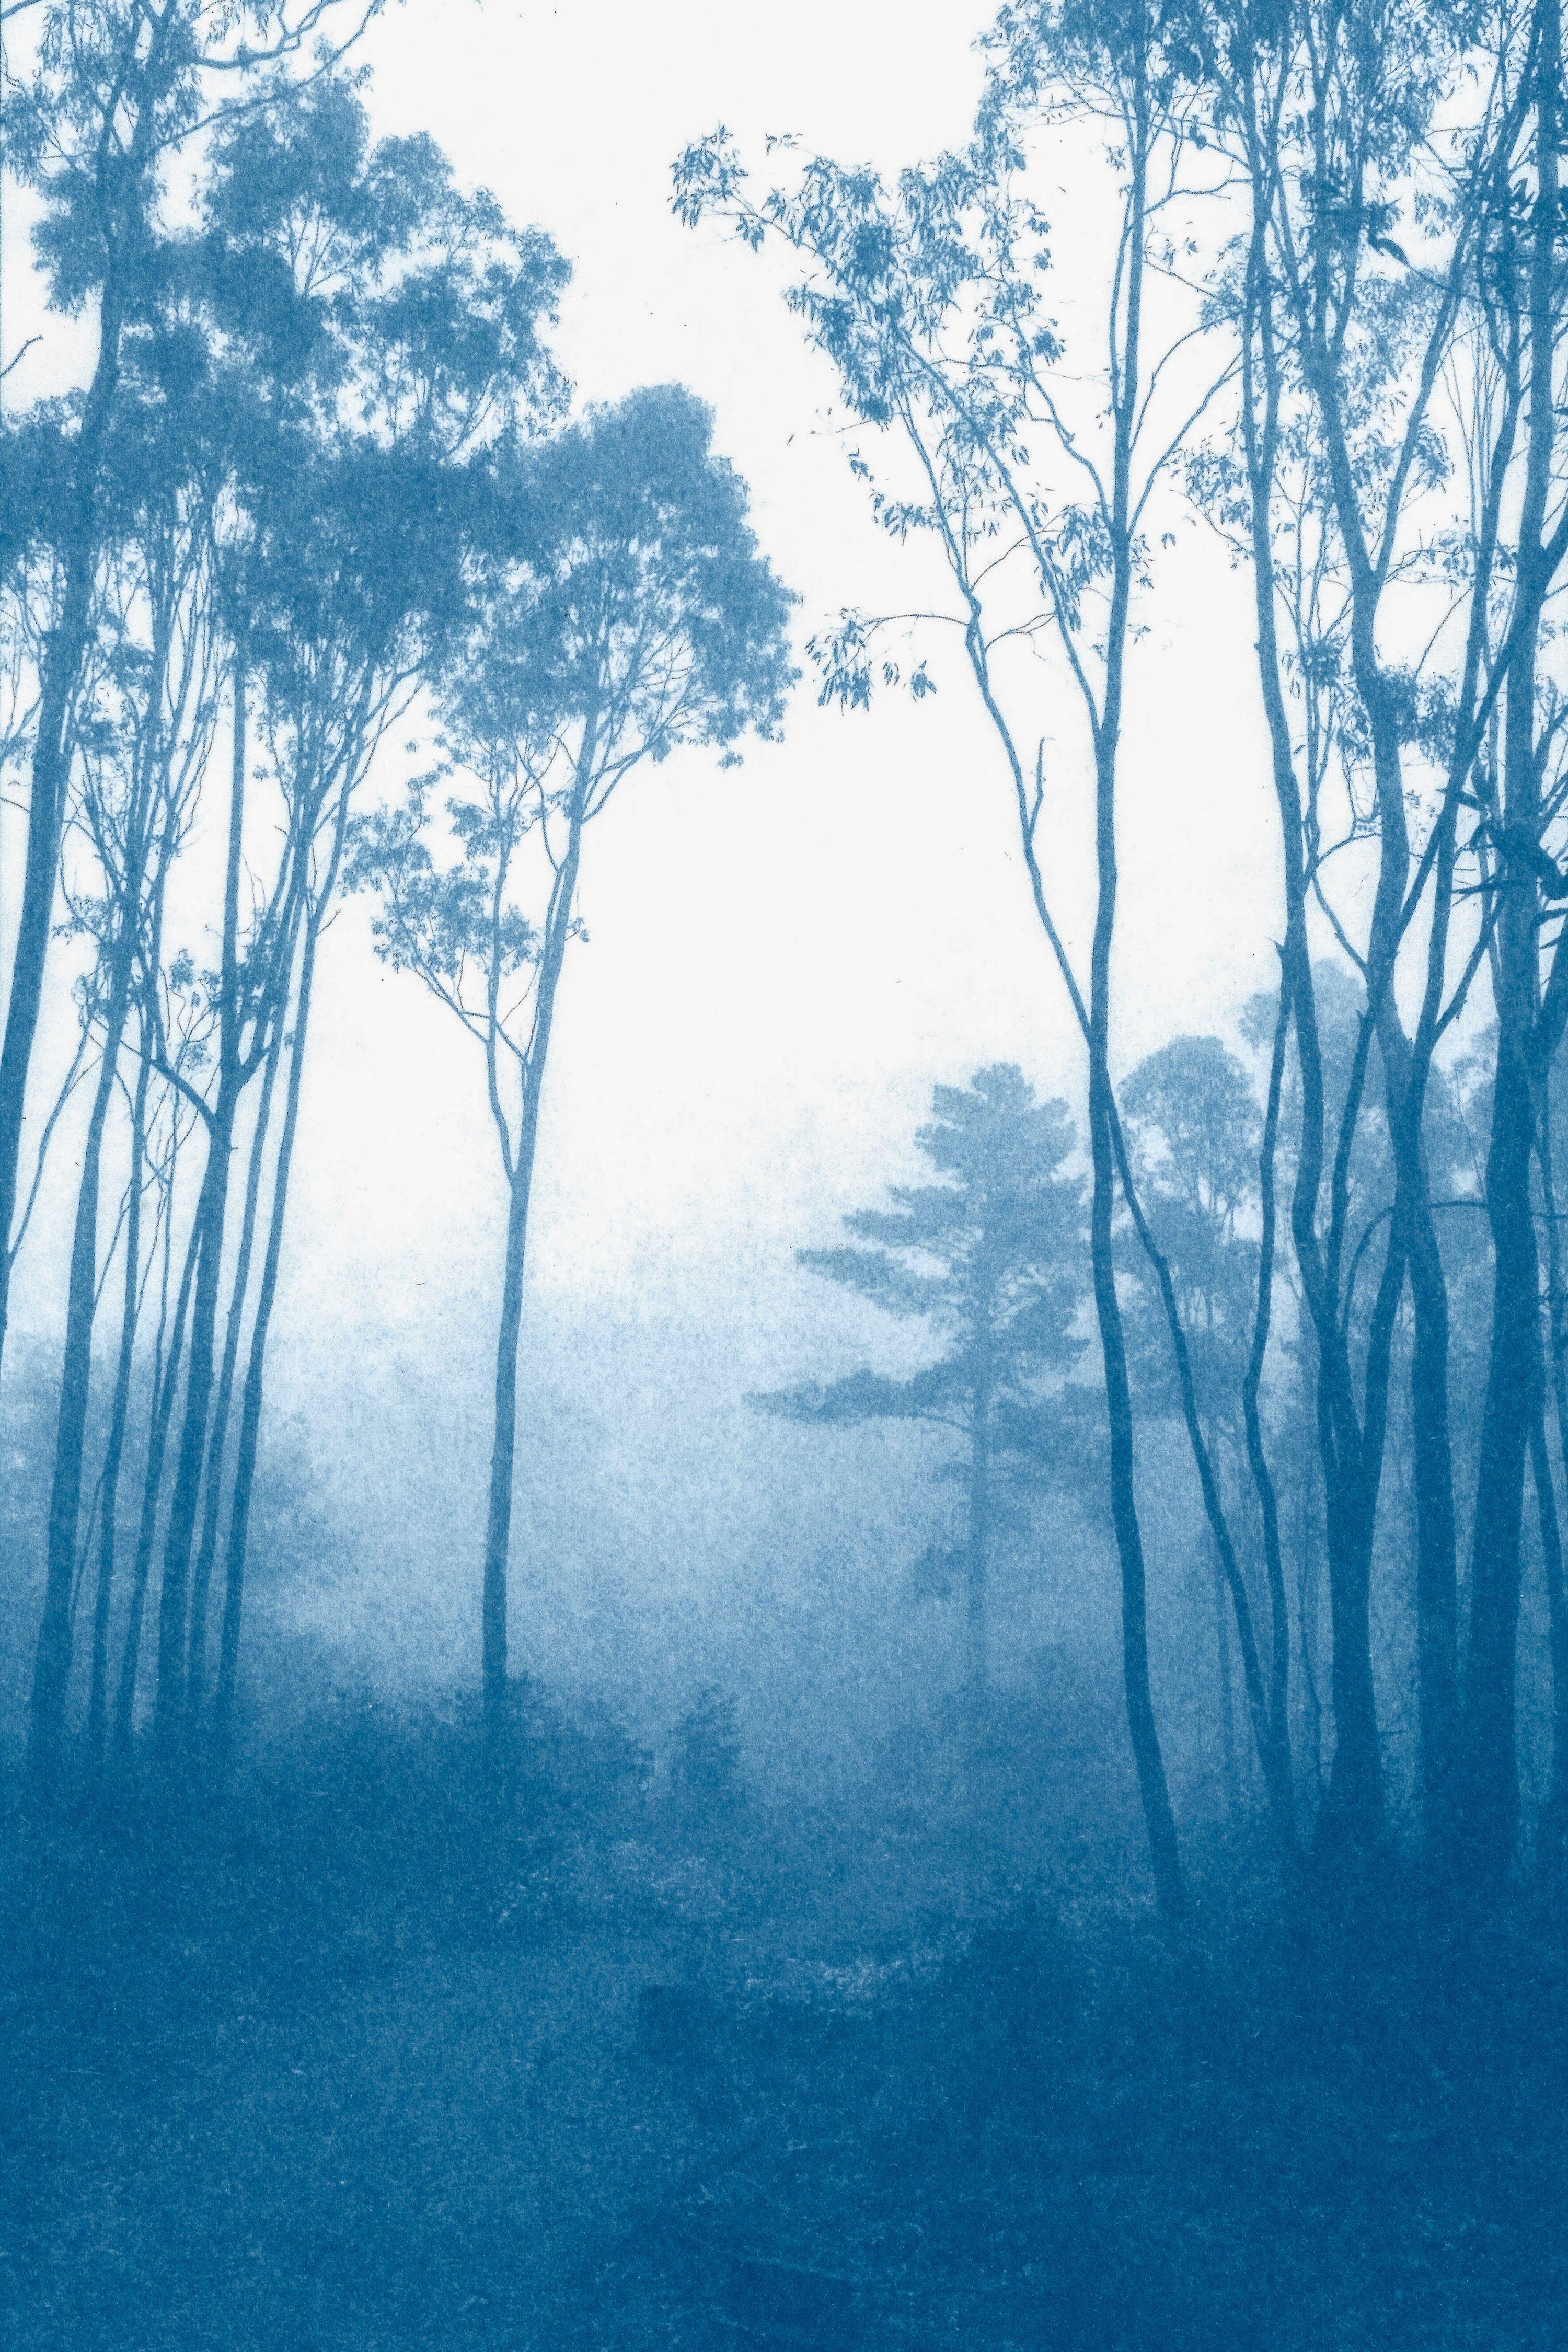 Christine So Landscape Print - The Journey's End  (Hand-printed cyanotype, 30 x 20 inches)